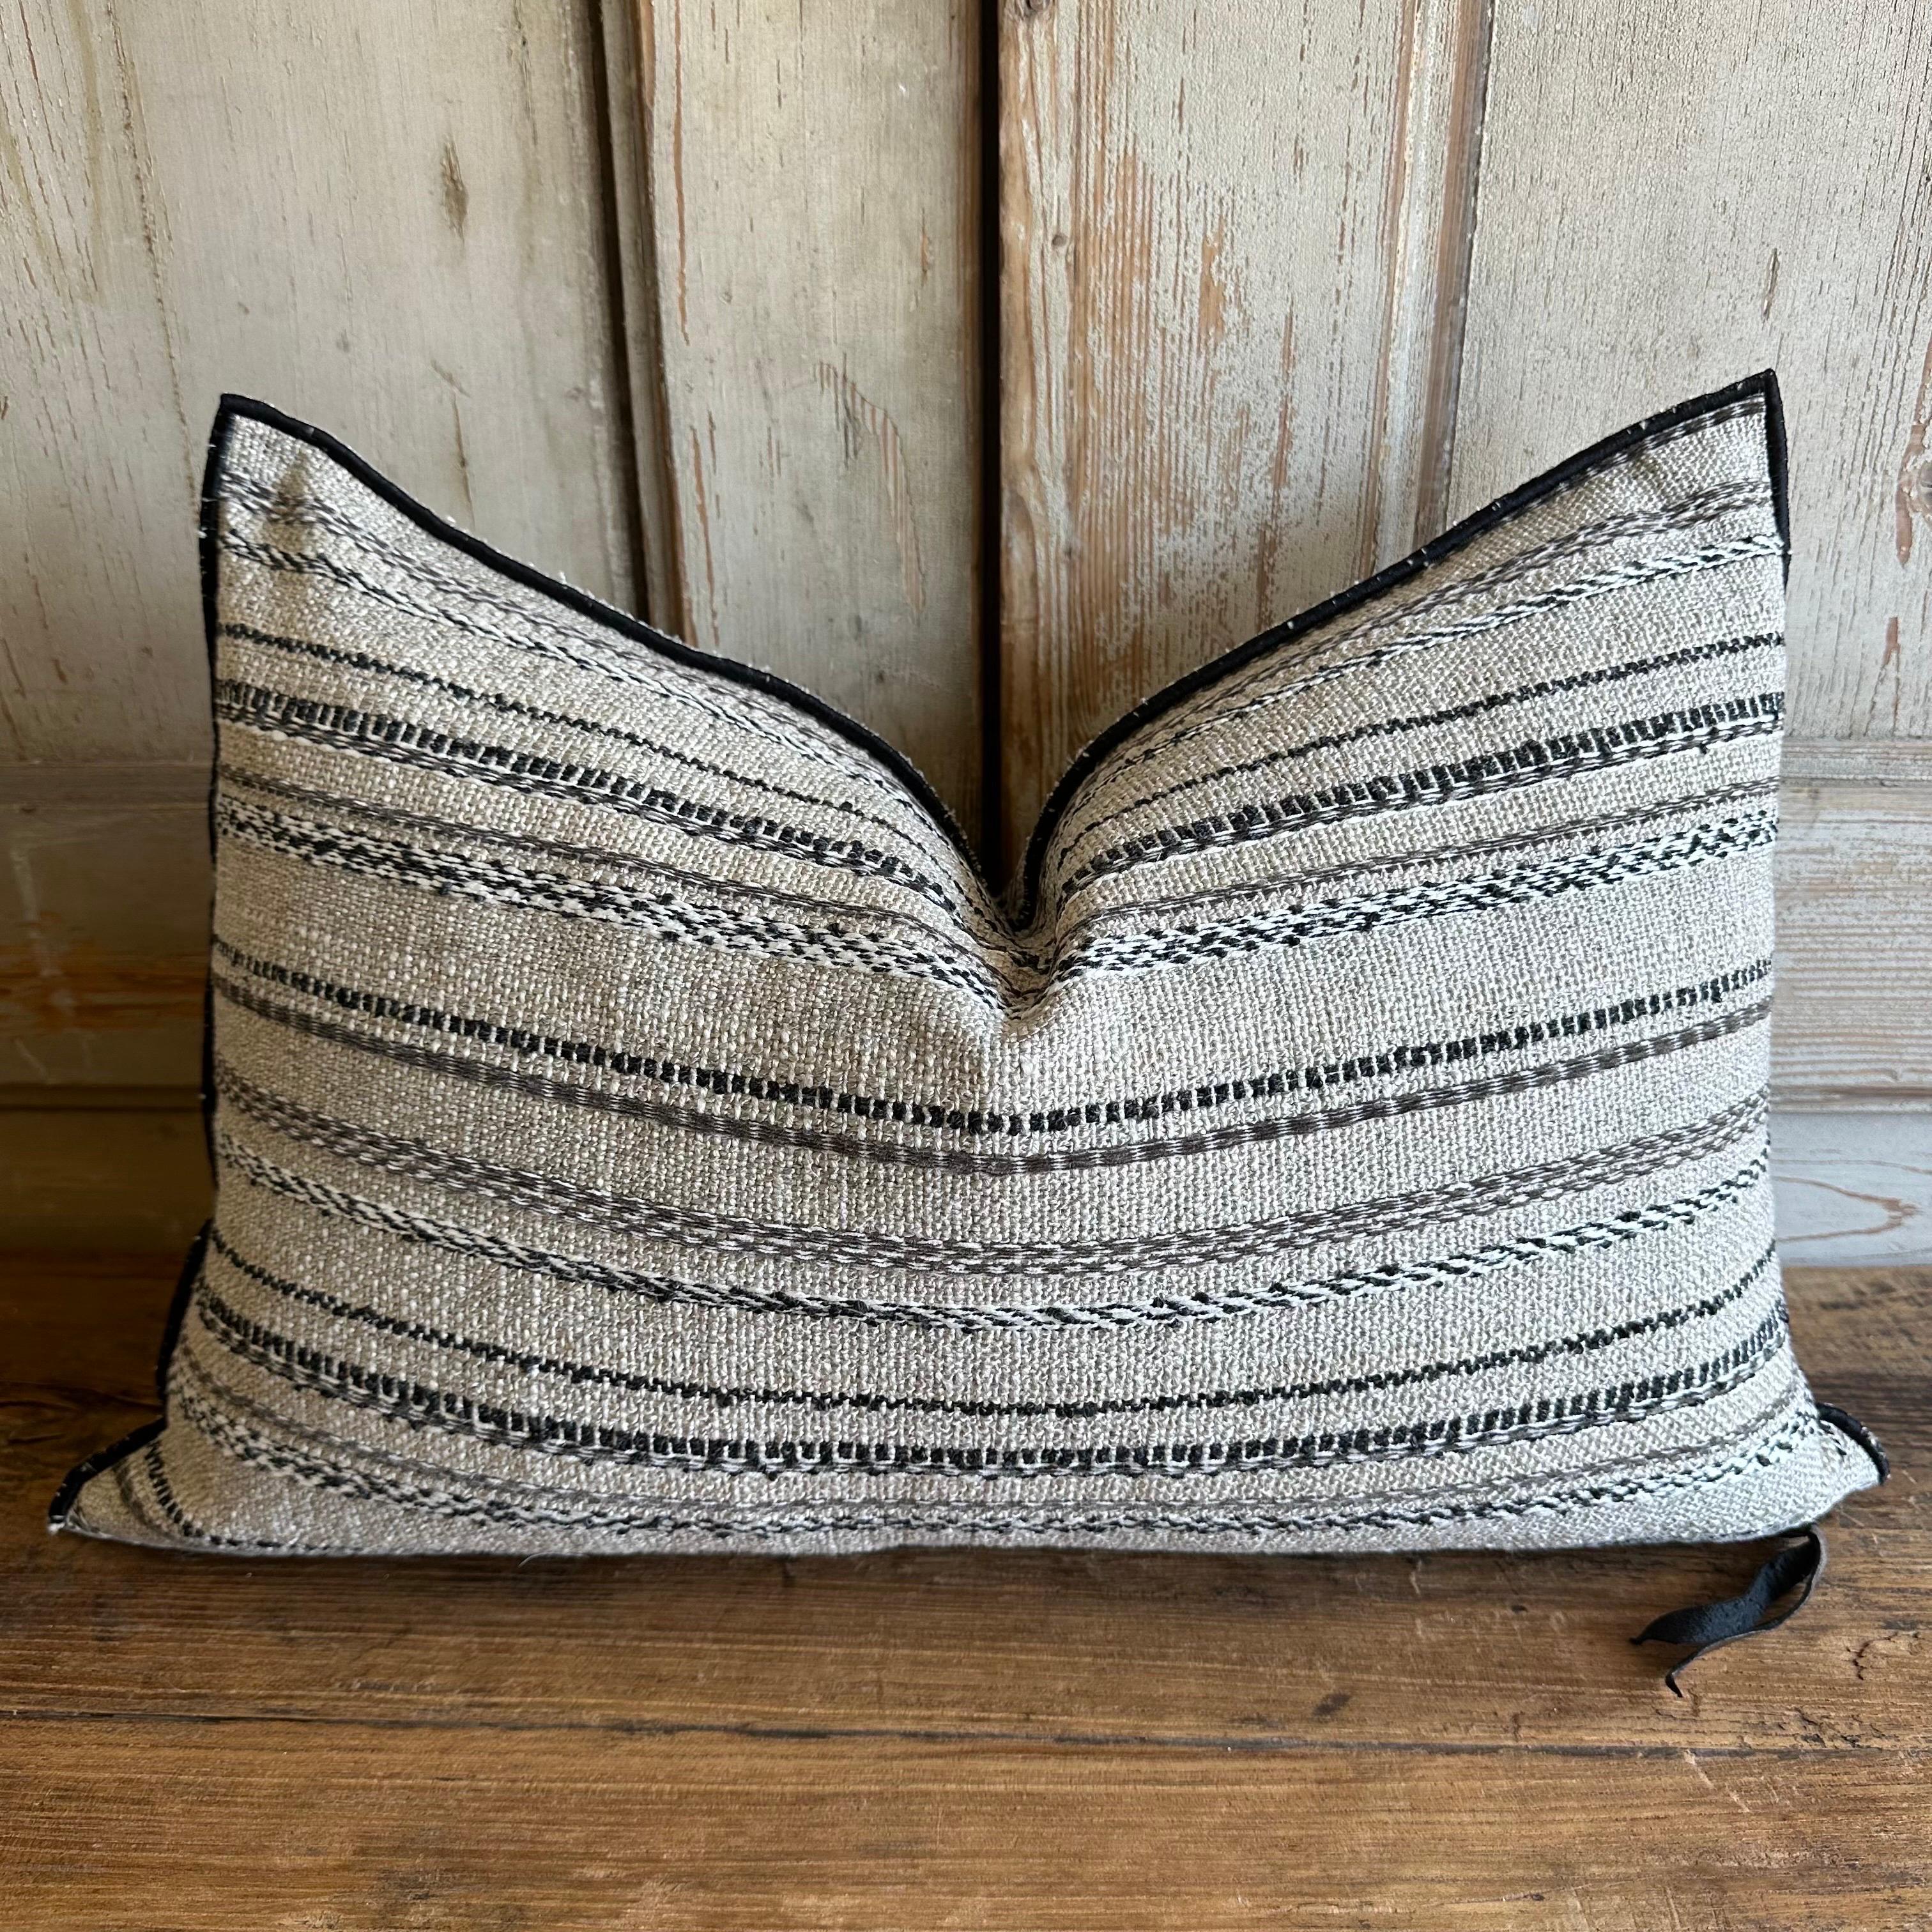 Custom made linen and wool embroidered stripe pillow cover.
Size: 15x23
Exquisite thick nubby linen in a flax natural with embroidered stripes in coal, white and cocoa brown.
Brass zipper closure, finished with a black stitched binded edge.
Made